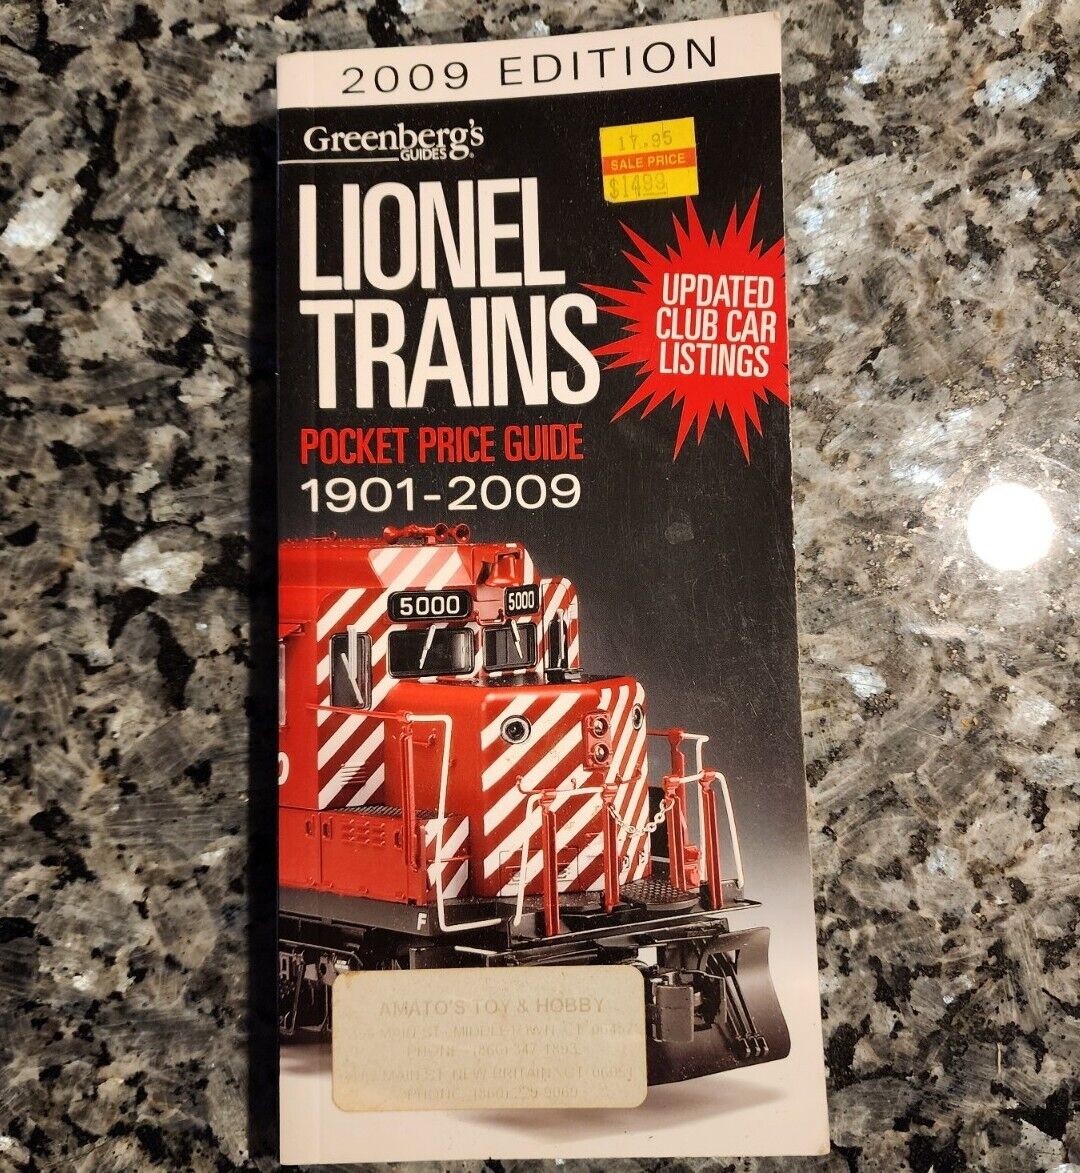 Greenberg's 2009 Edition Lionel Trains Pocket Guide 1901-2009 Updated Listings